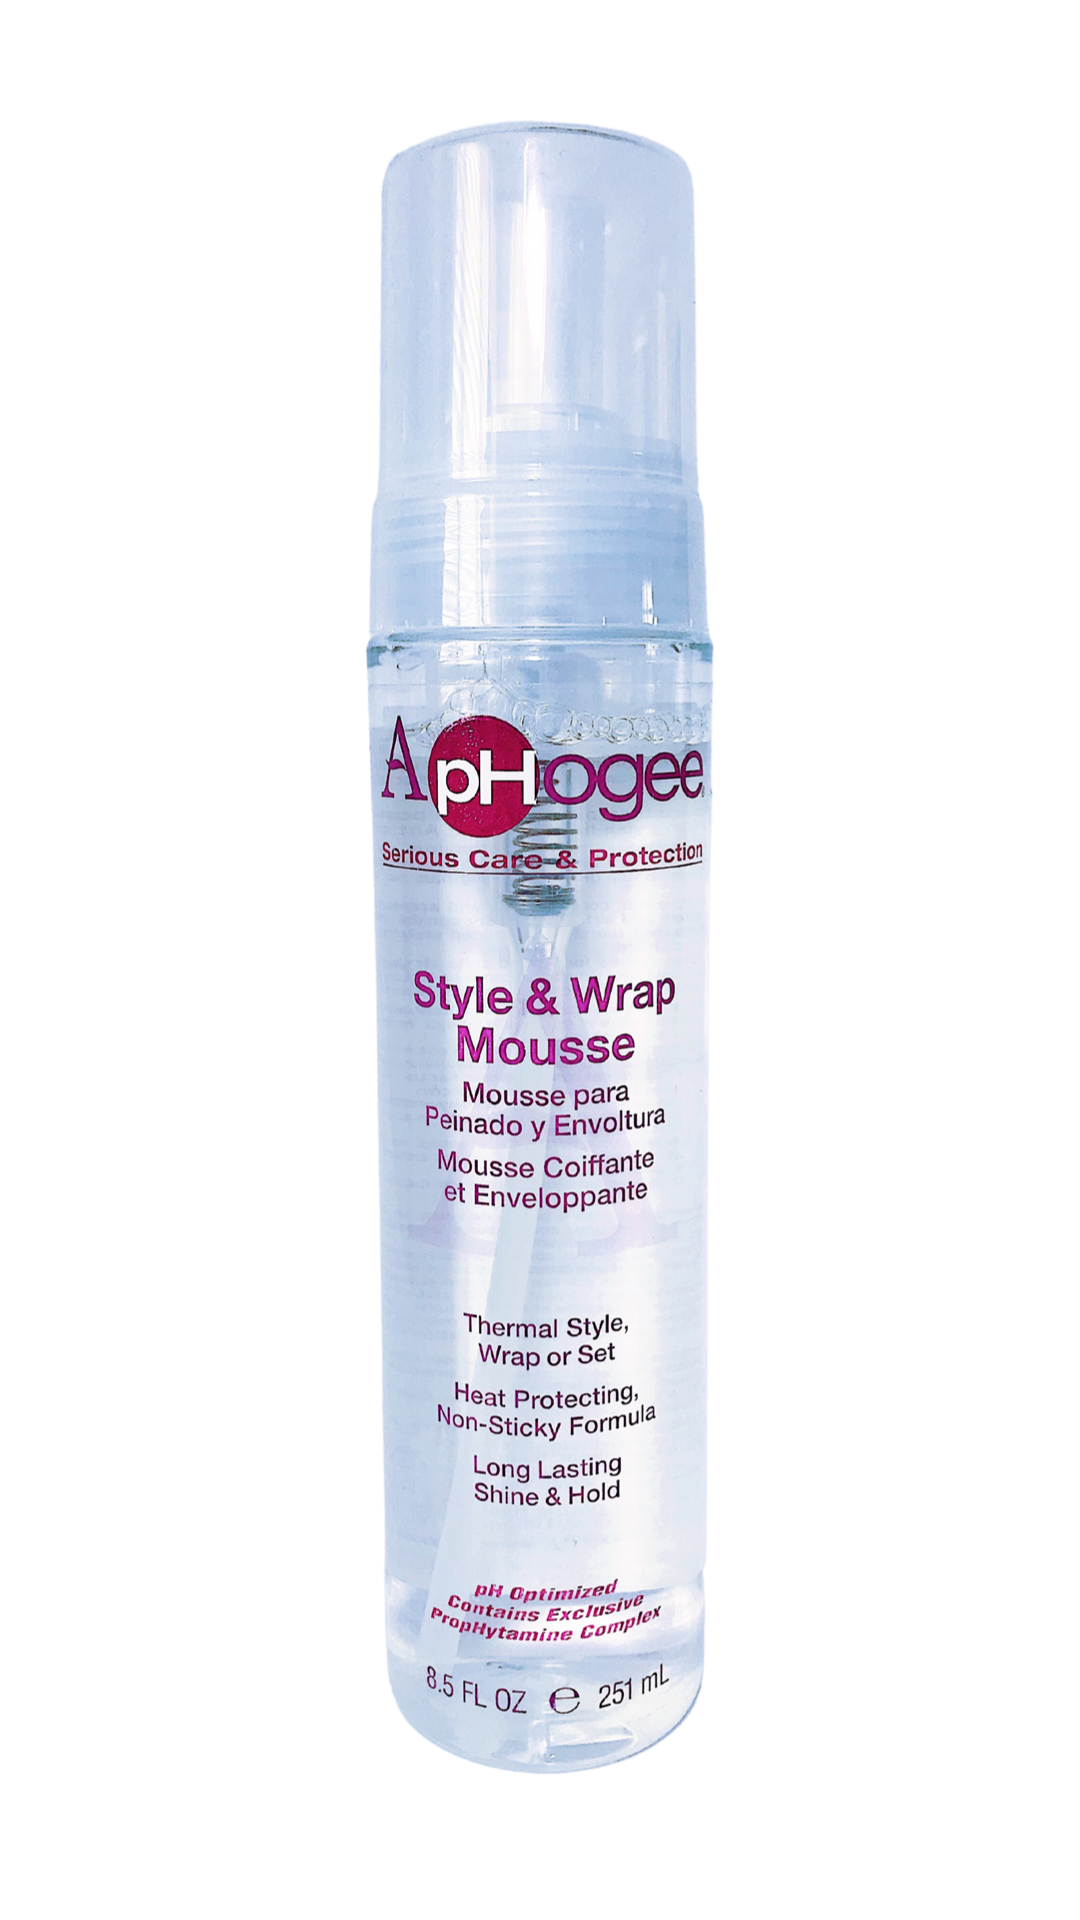 aphogee-style-wrap-mousse.jpg